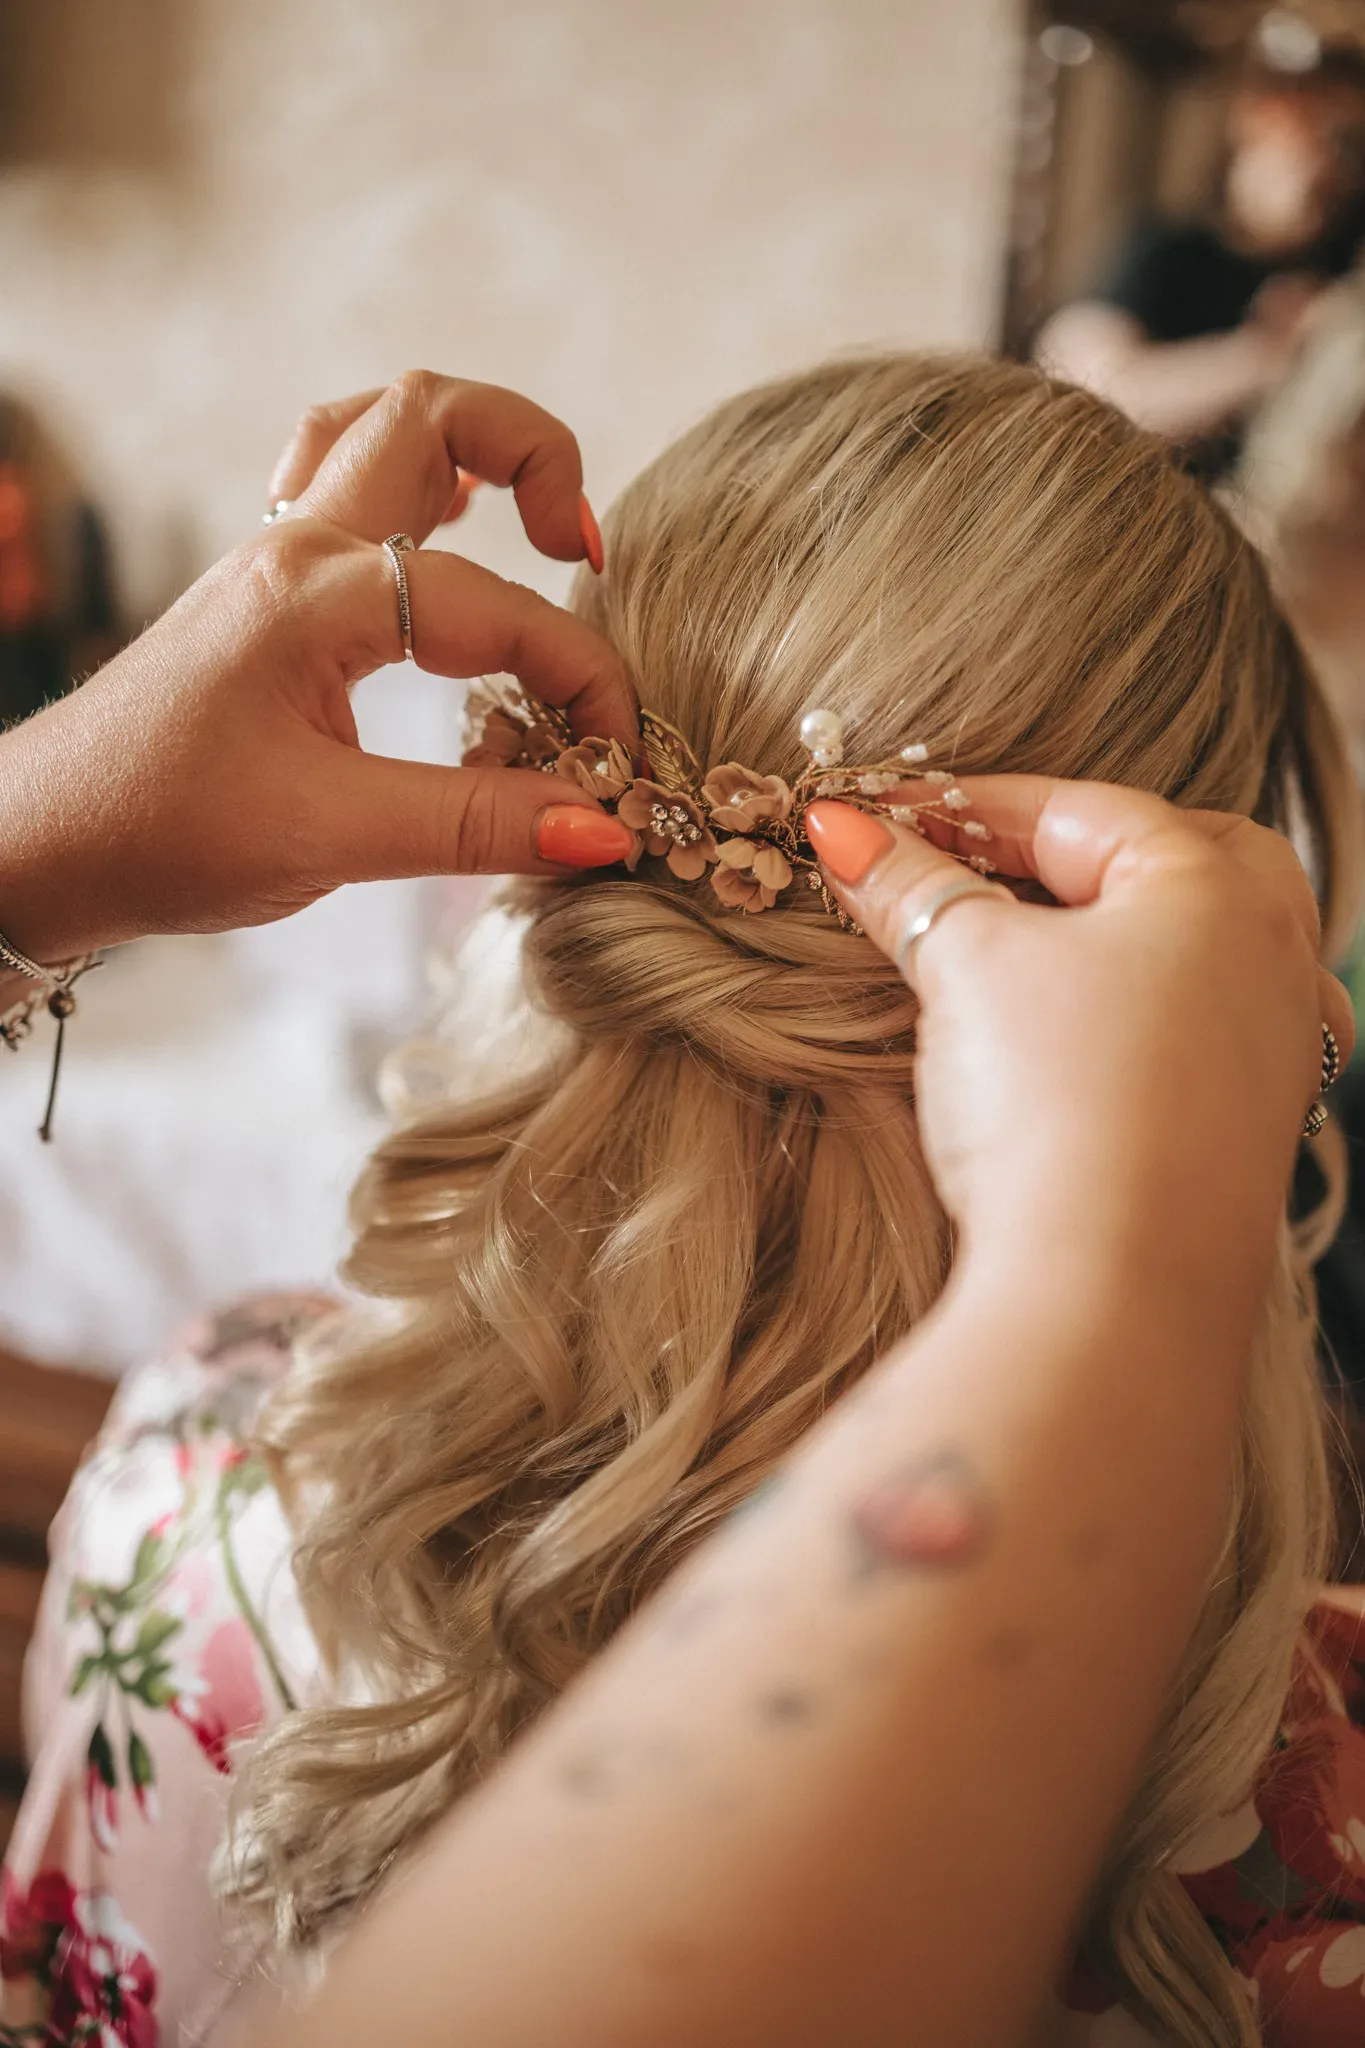 A person fastens a decorative floral hair accessory into another person's intricately styled blonde hair, featuring curls and braids. the setting appears to be a room with a soft-focus background.